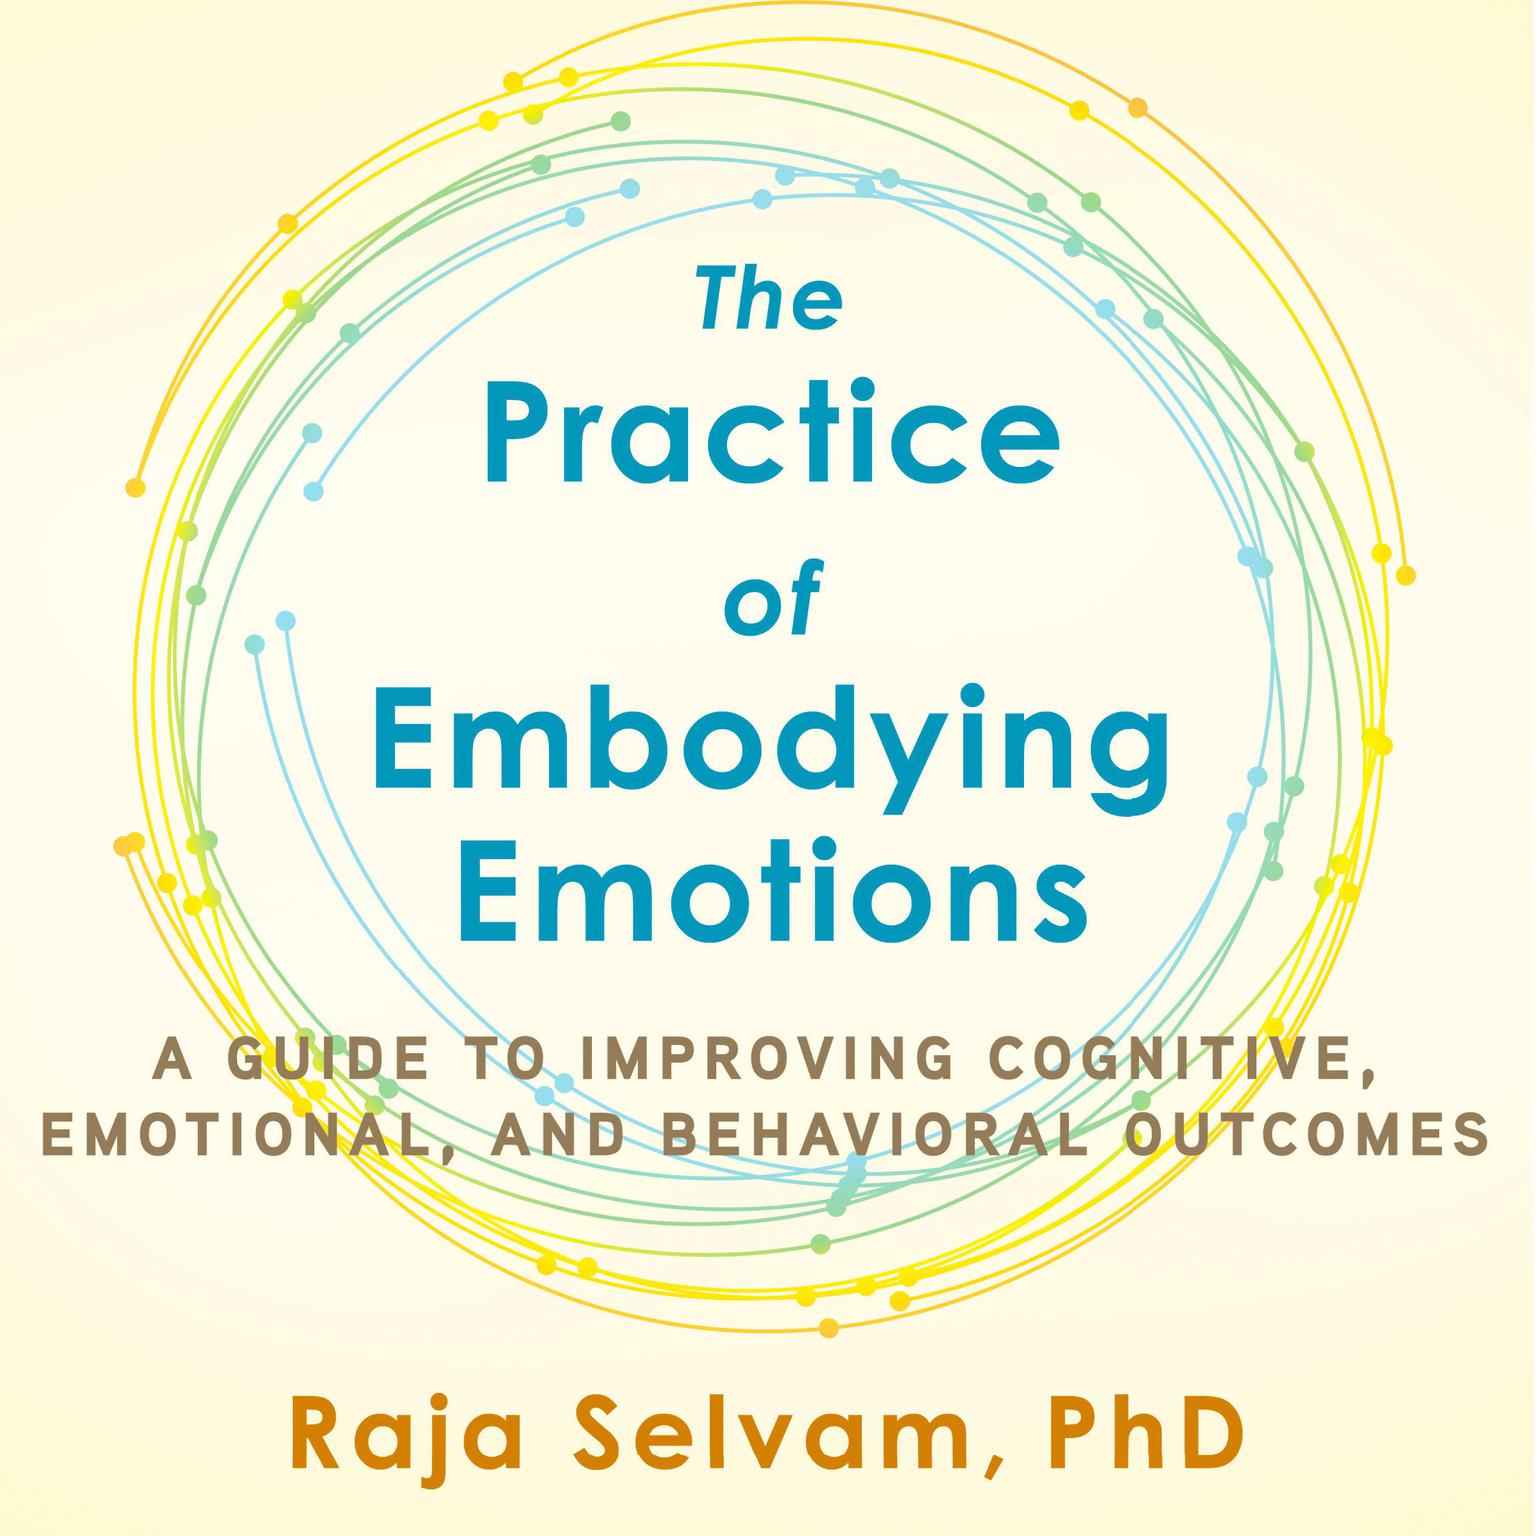 The Practice of Embodying Emotions: A Guide for Improving Cognitive, Emotional, and Behavioral Outcomes Audiobook, by Raja Selvam